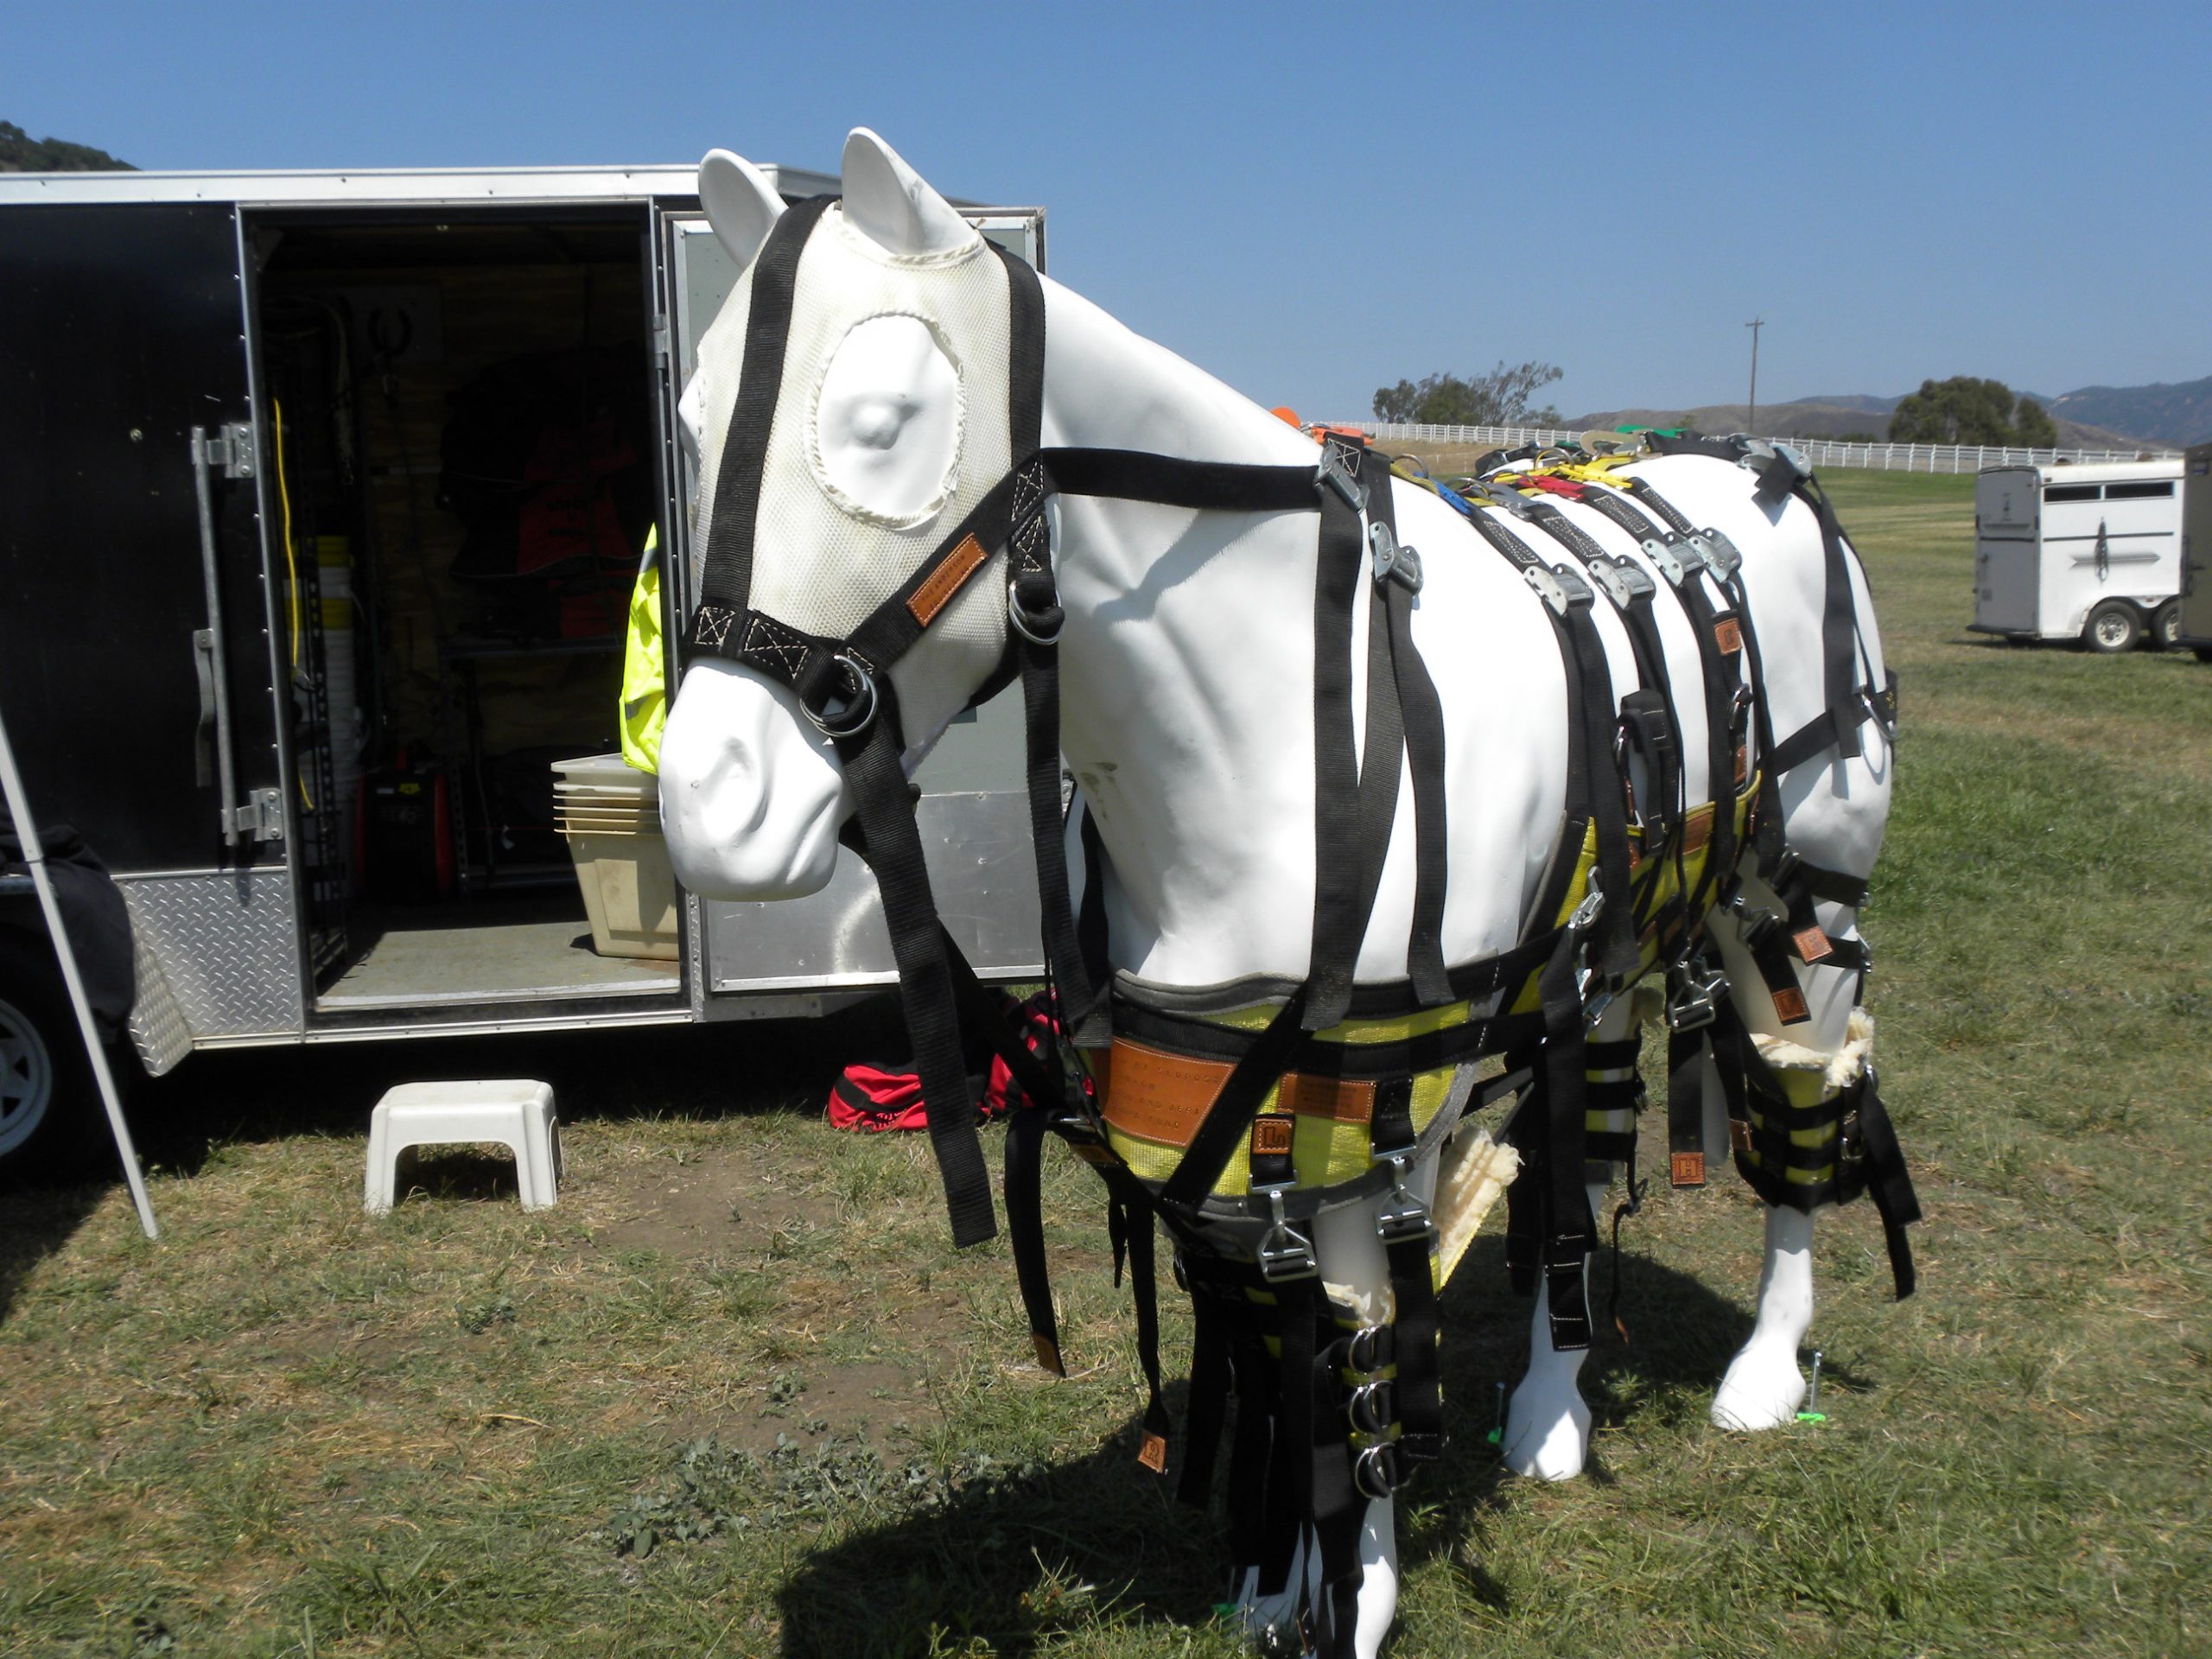 H.E.E.T. Volunteers : Not Just Fire Rescuers | SLO Horse News